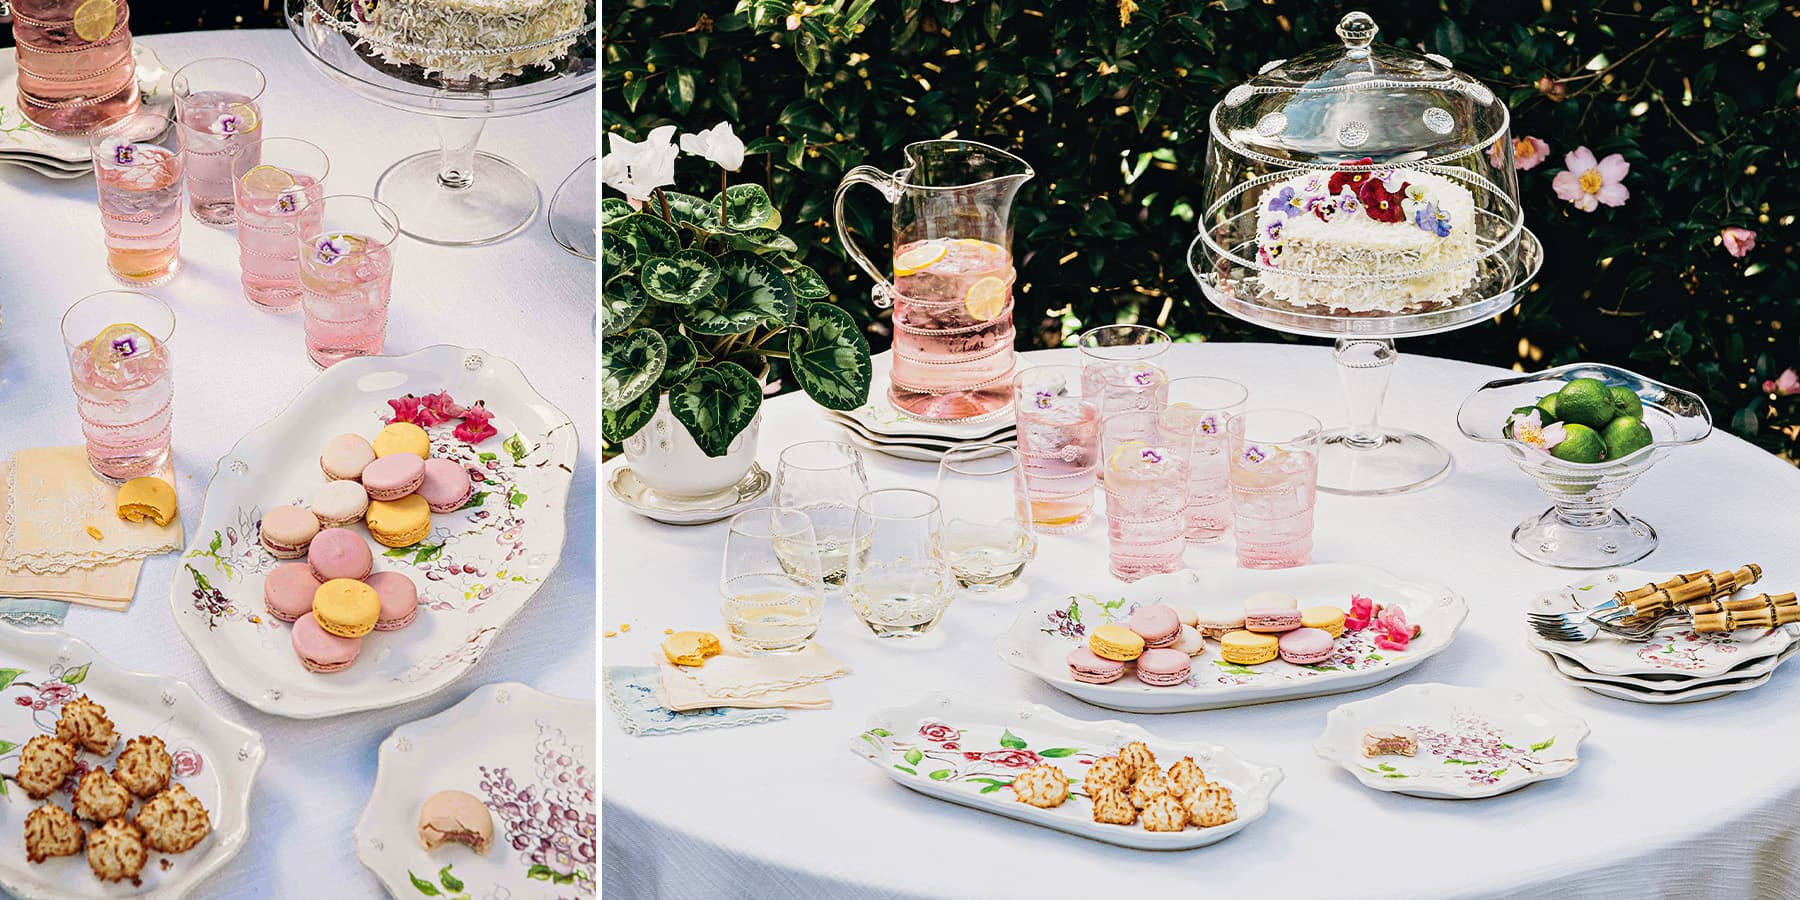 A table laden with elevated servings of desserts and drinks creates an enchanting presentation.